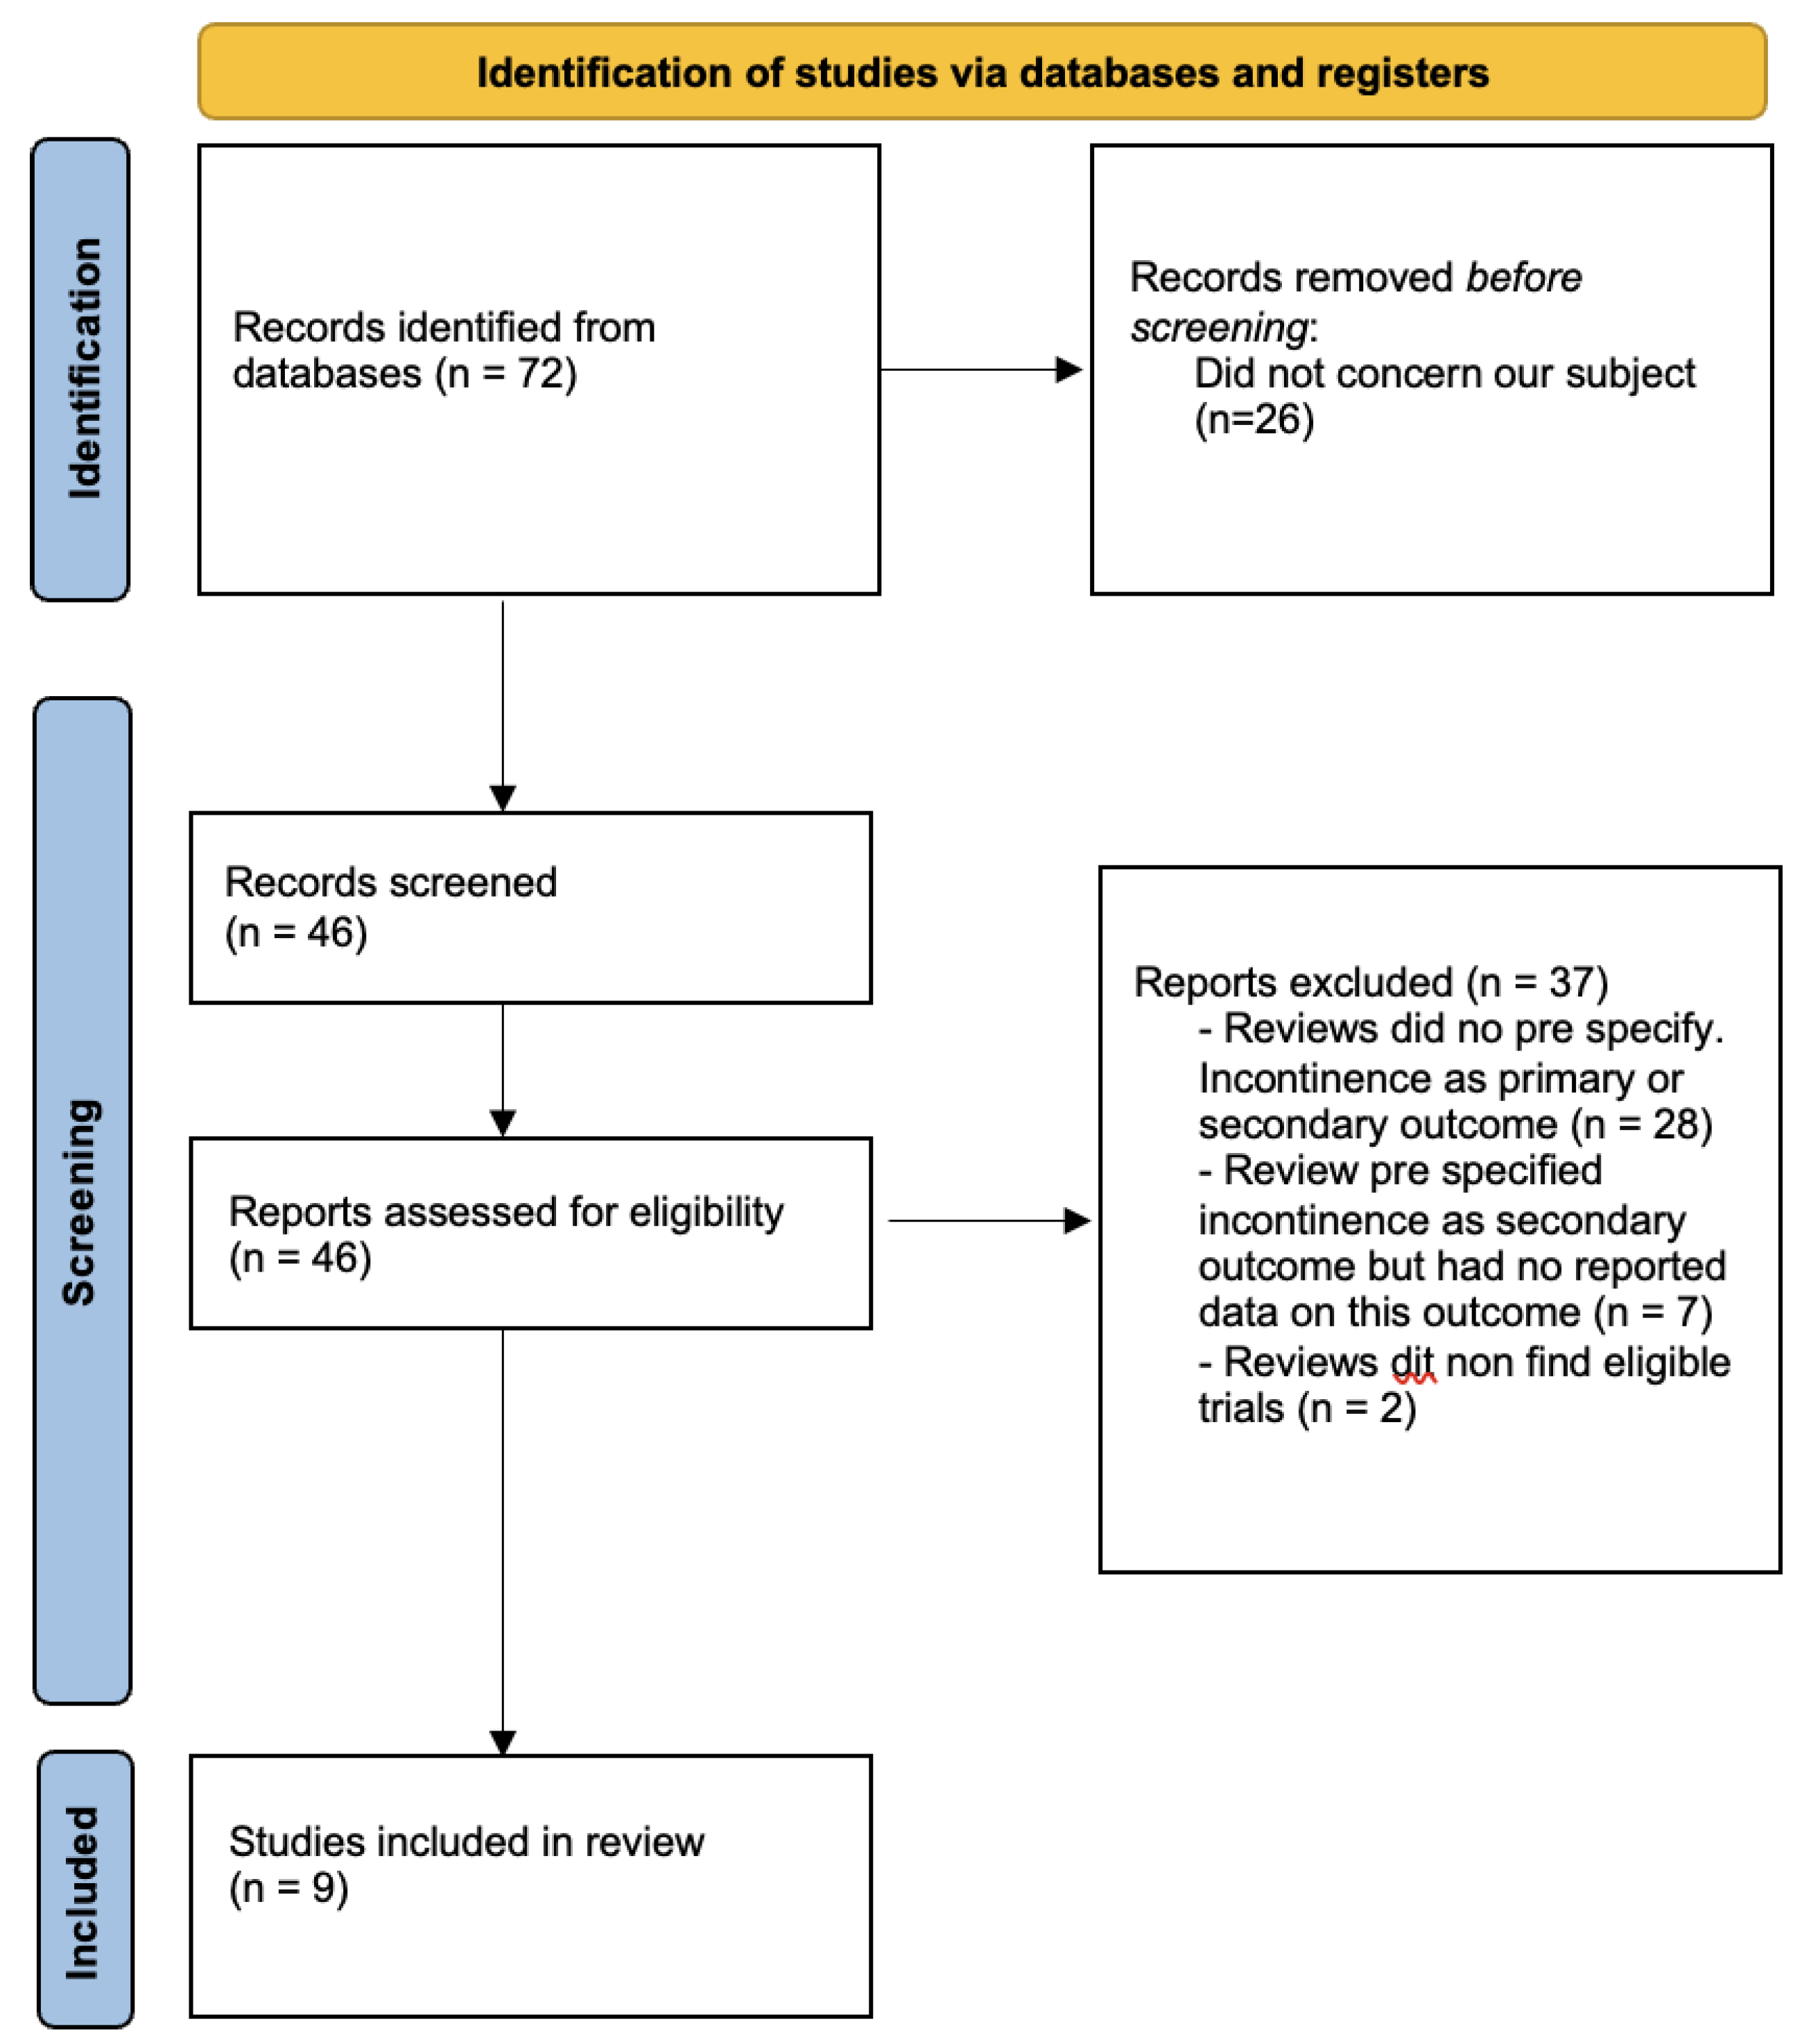 Association of epidural analgesia during labor and early postpartum urinary  incontinence among women delivered vaginally: a propensity score matched  retrospective cohort study, BMC Pregnancy and Childbirth